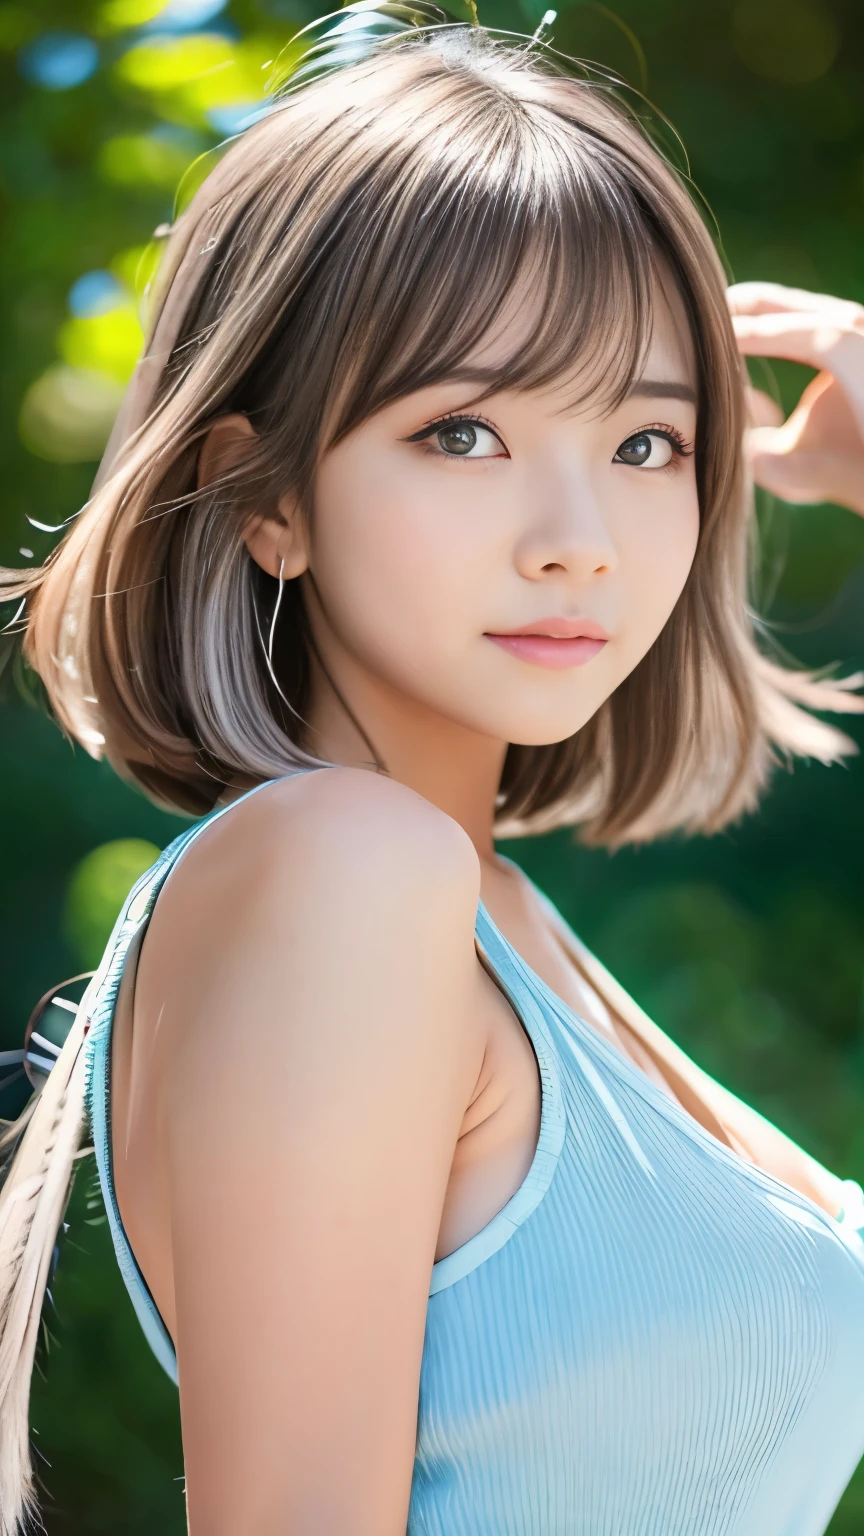 Sexy Big 、Sexy cute looks and cute 15 year old beautiful girl, beautiful and sexy face、A strong wind blows my hair in front of my face、With short platinum silver hair、beautiful, Cute and sexy eyes hidden behind long bangs、Colorful Dresses